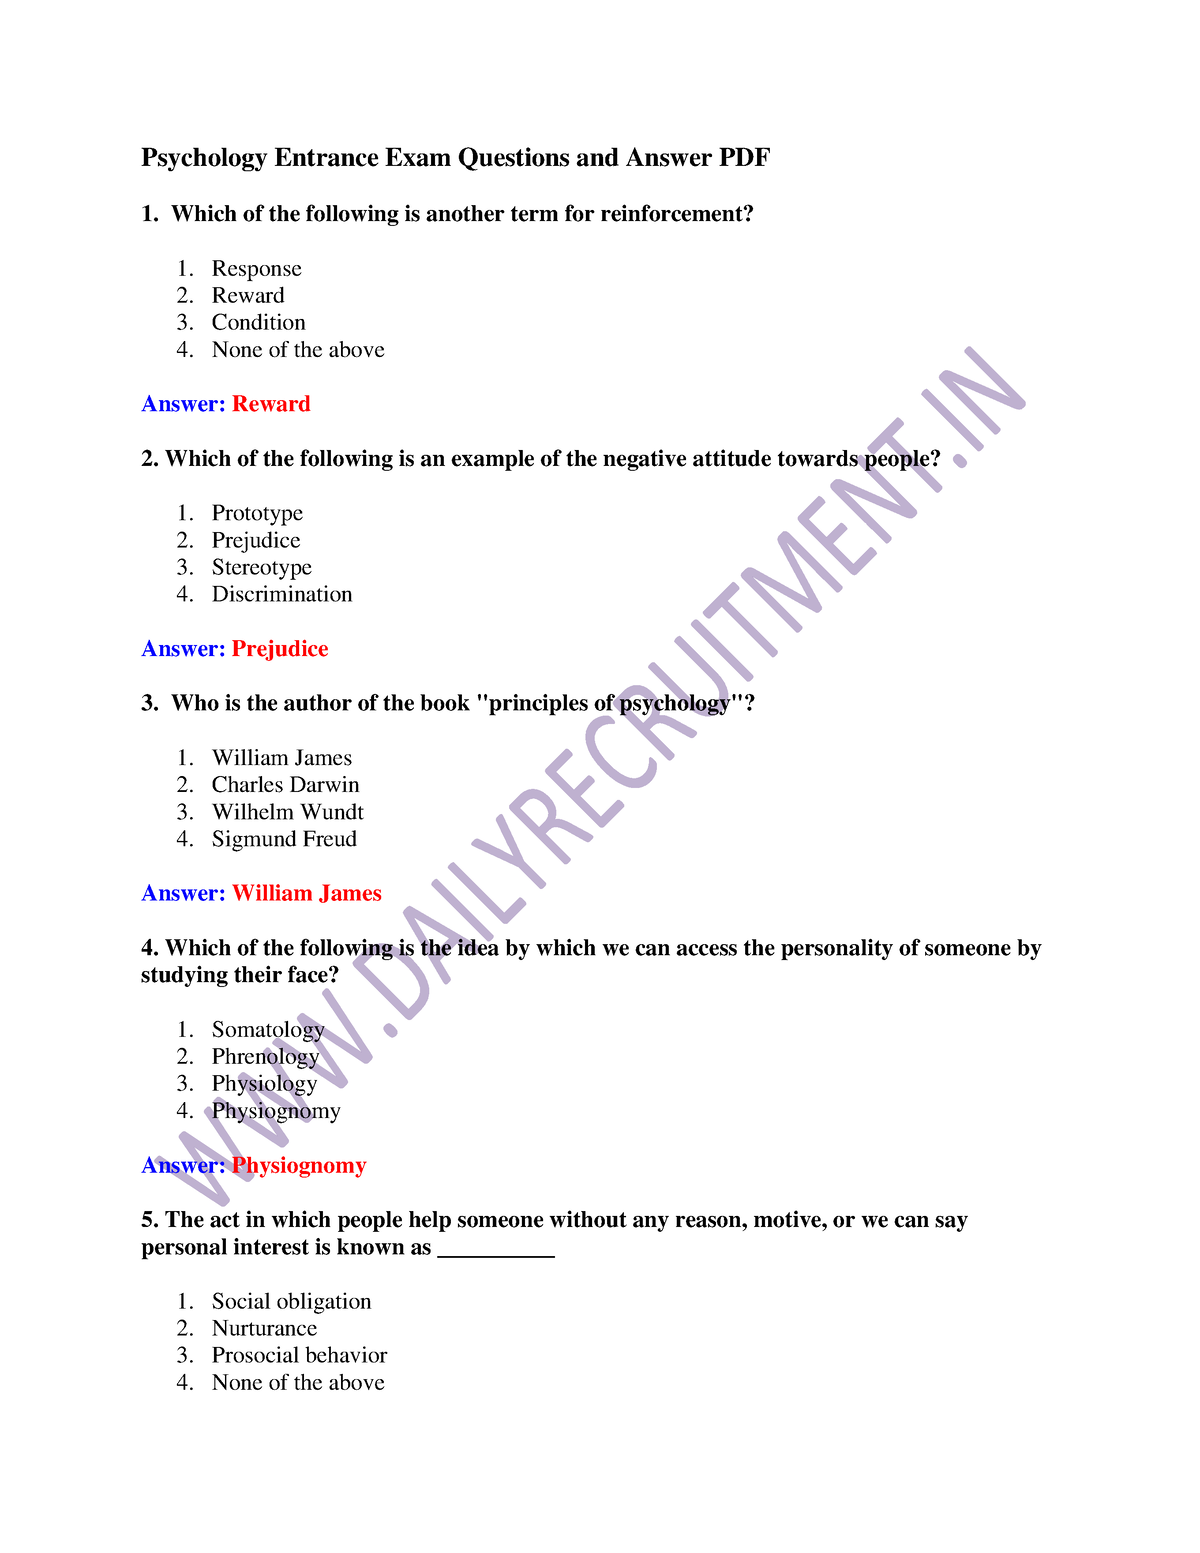 phd entrance exam question papers for psychology